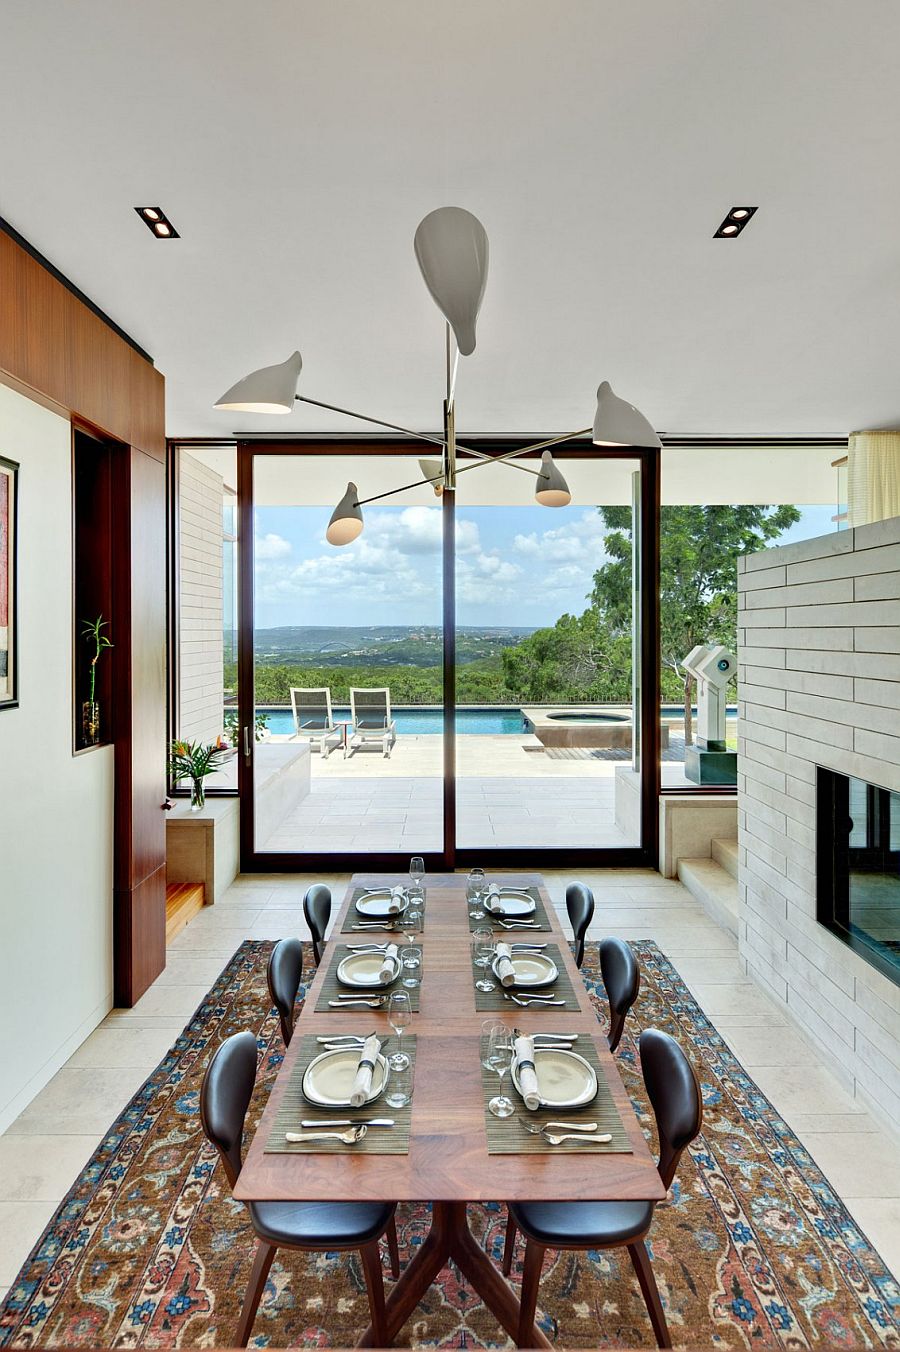 Formal dining area of the Lake View Residence connected visually with the pool deck outside